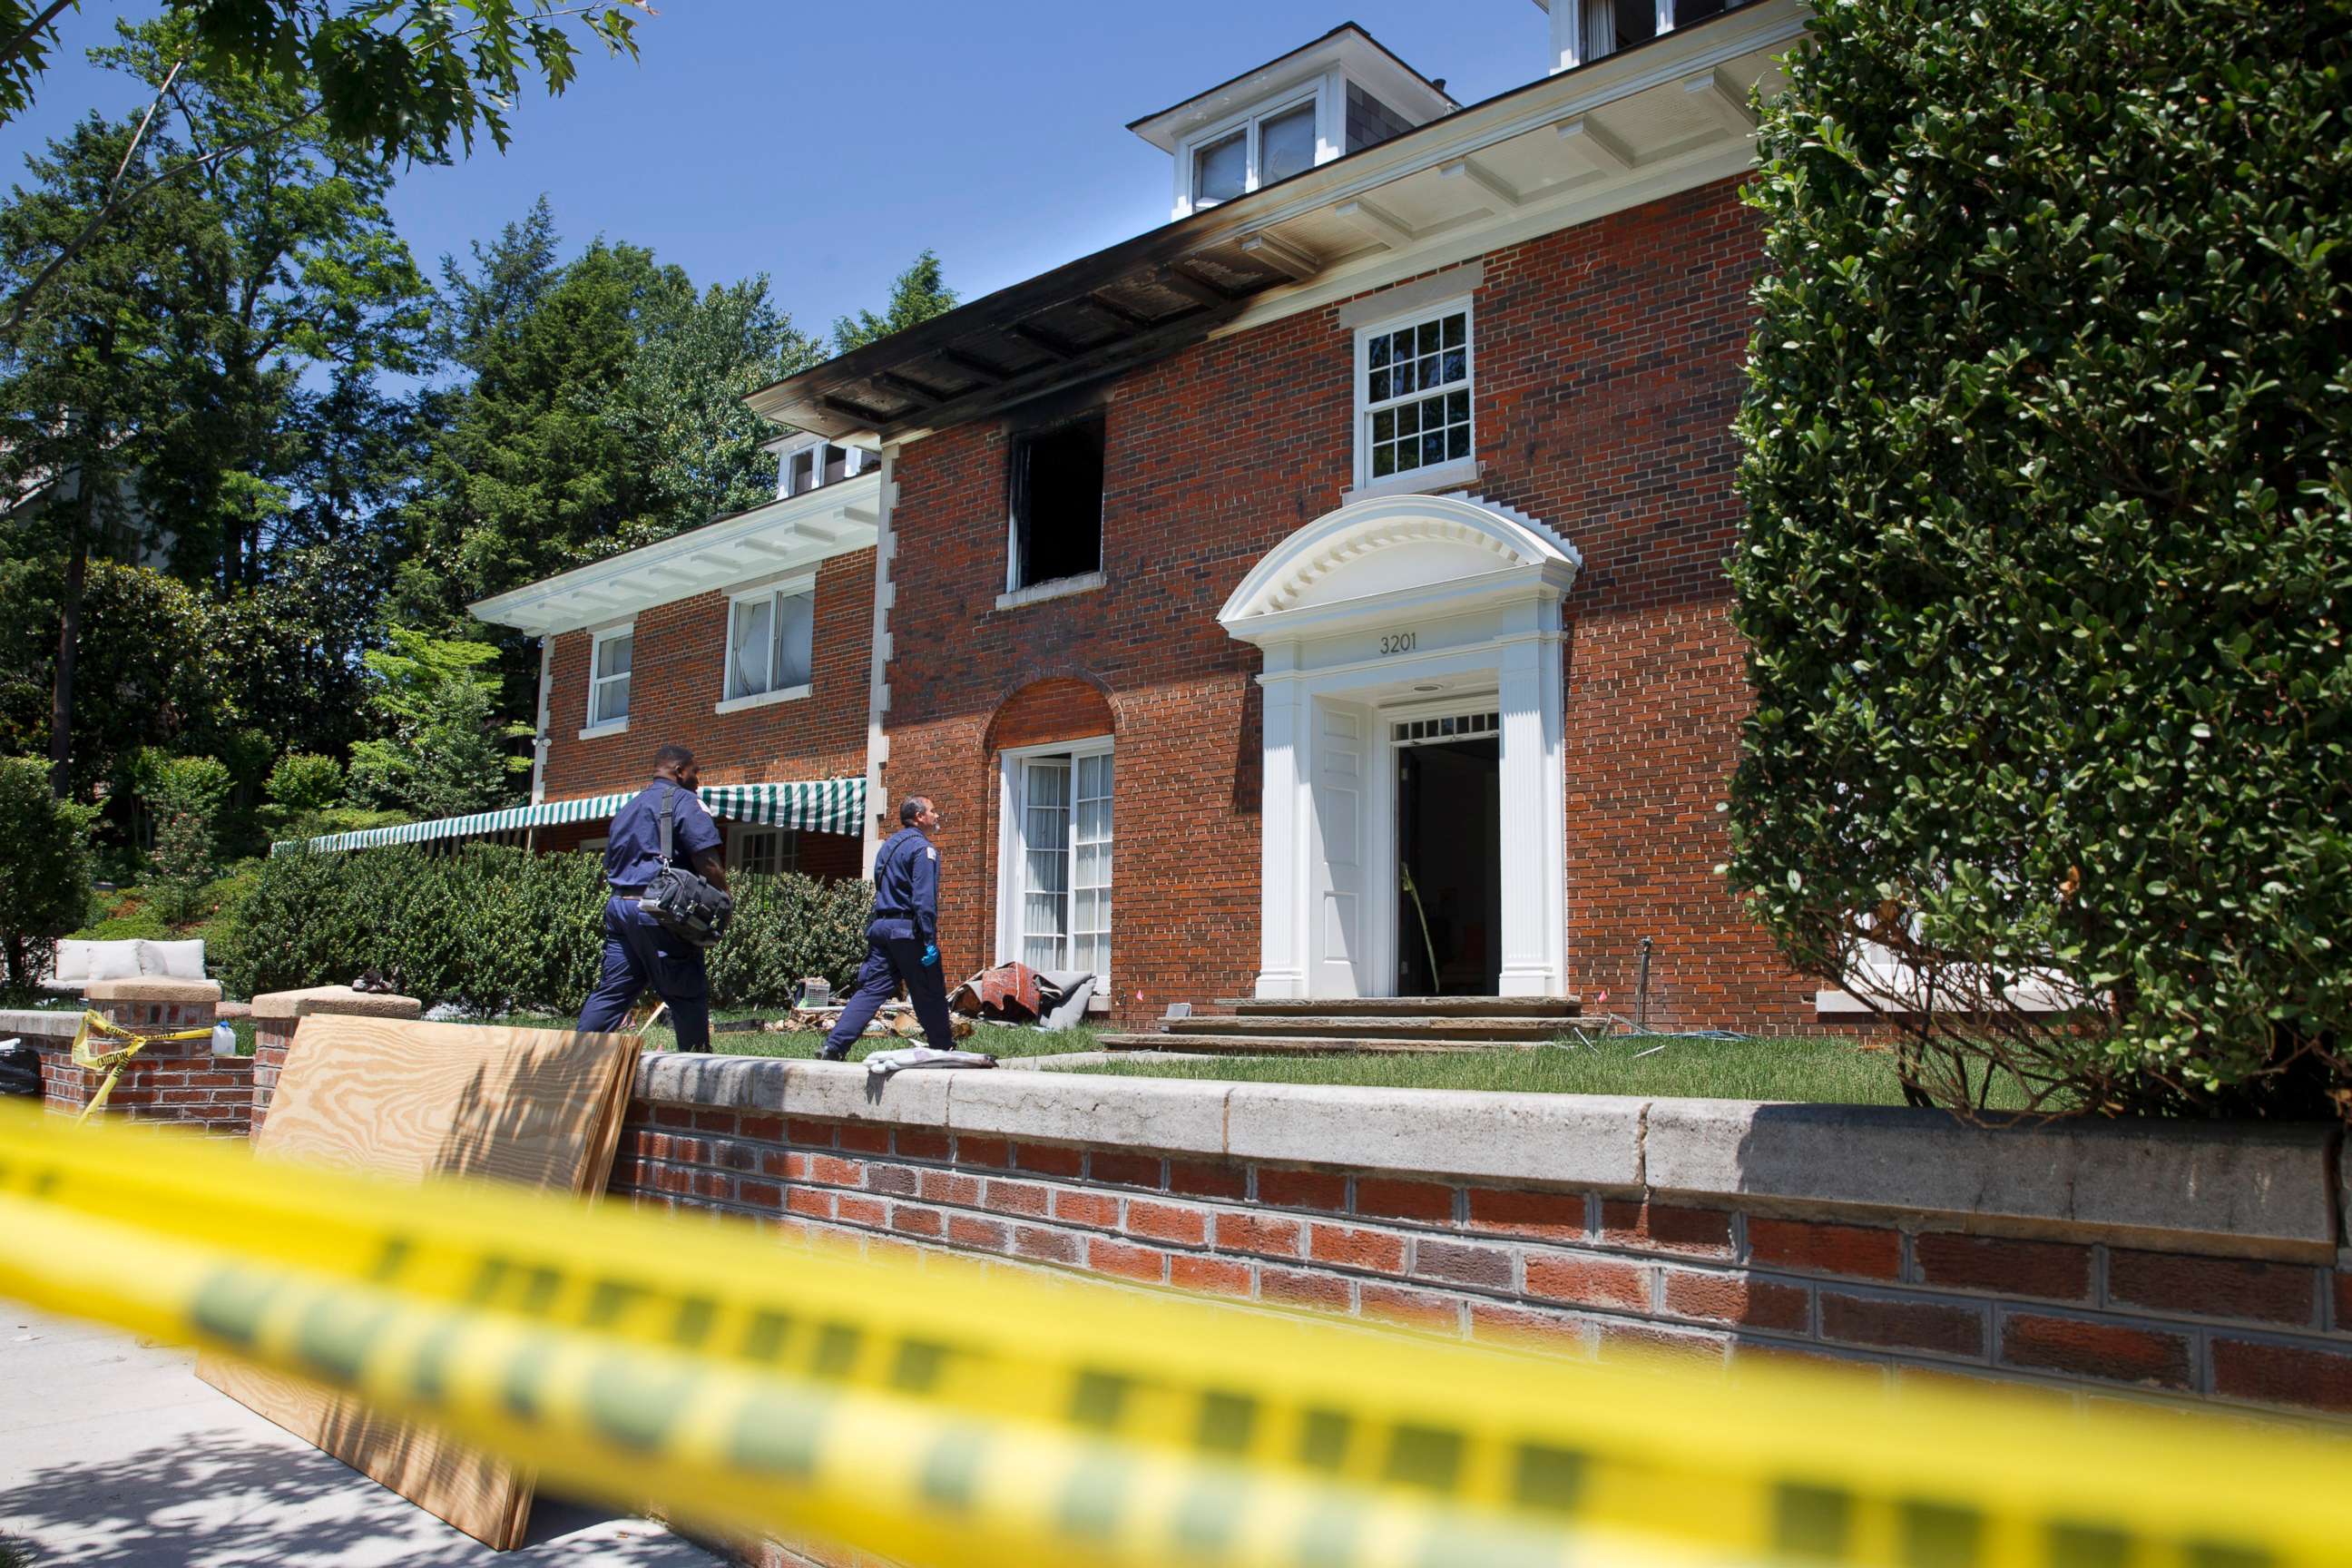 PHOTO: Police work the scene of a fire-damaged multimillion-dollar home in northwest Washington home, May 22, 2015, where 46-year-old Savvas Savopoulos, his wife, the couple's 10-year-old son Philip, and housekeeper were found dead.